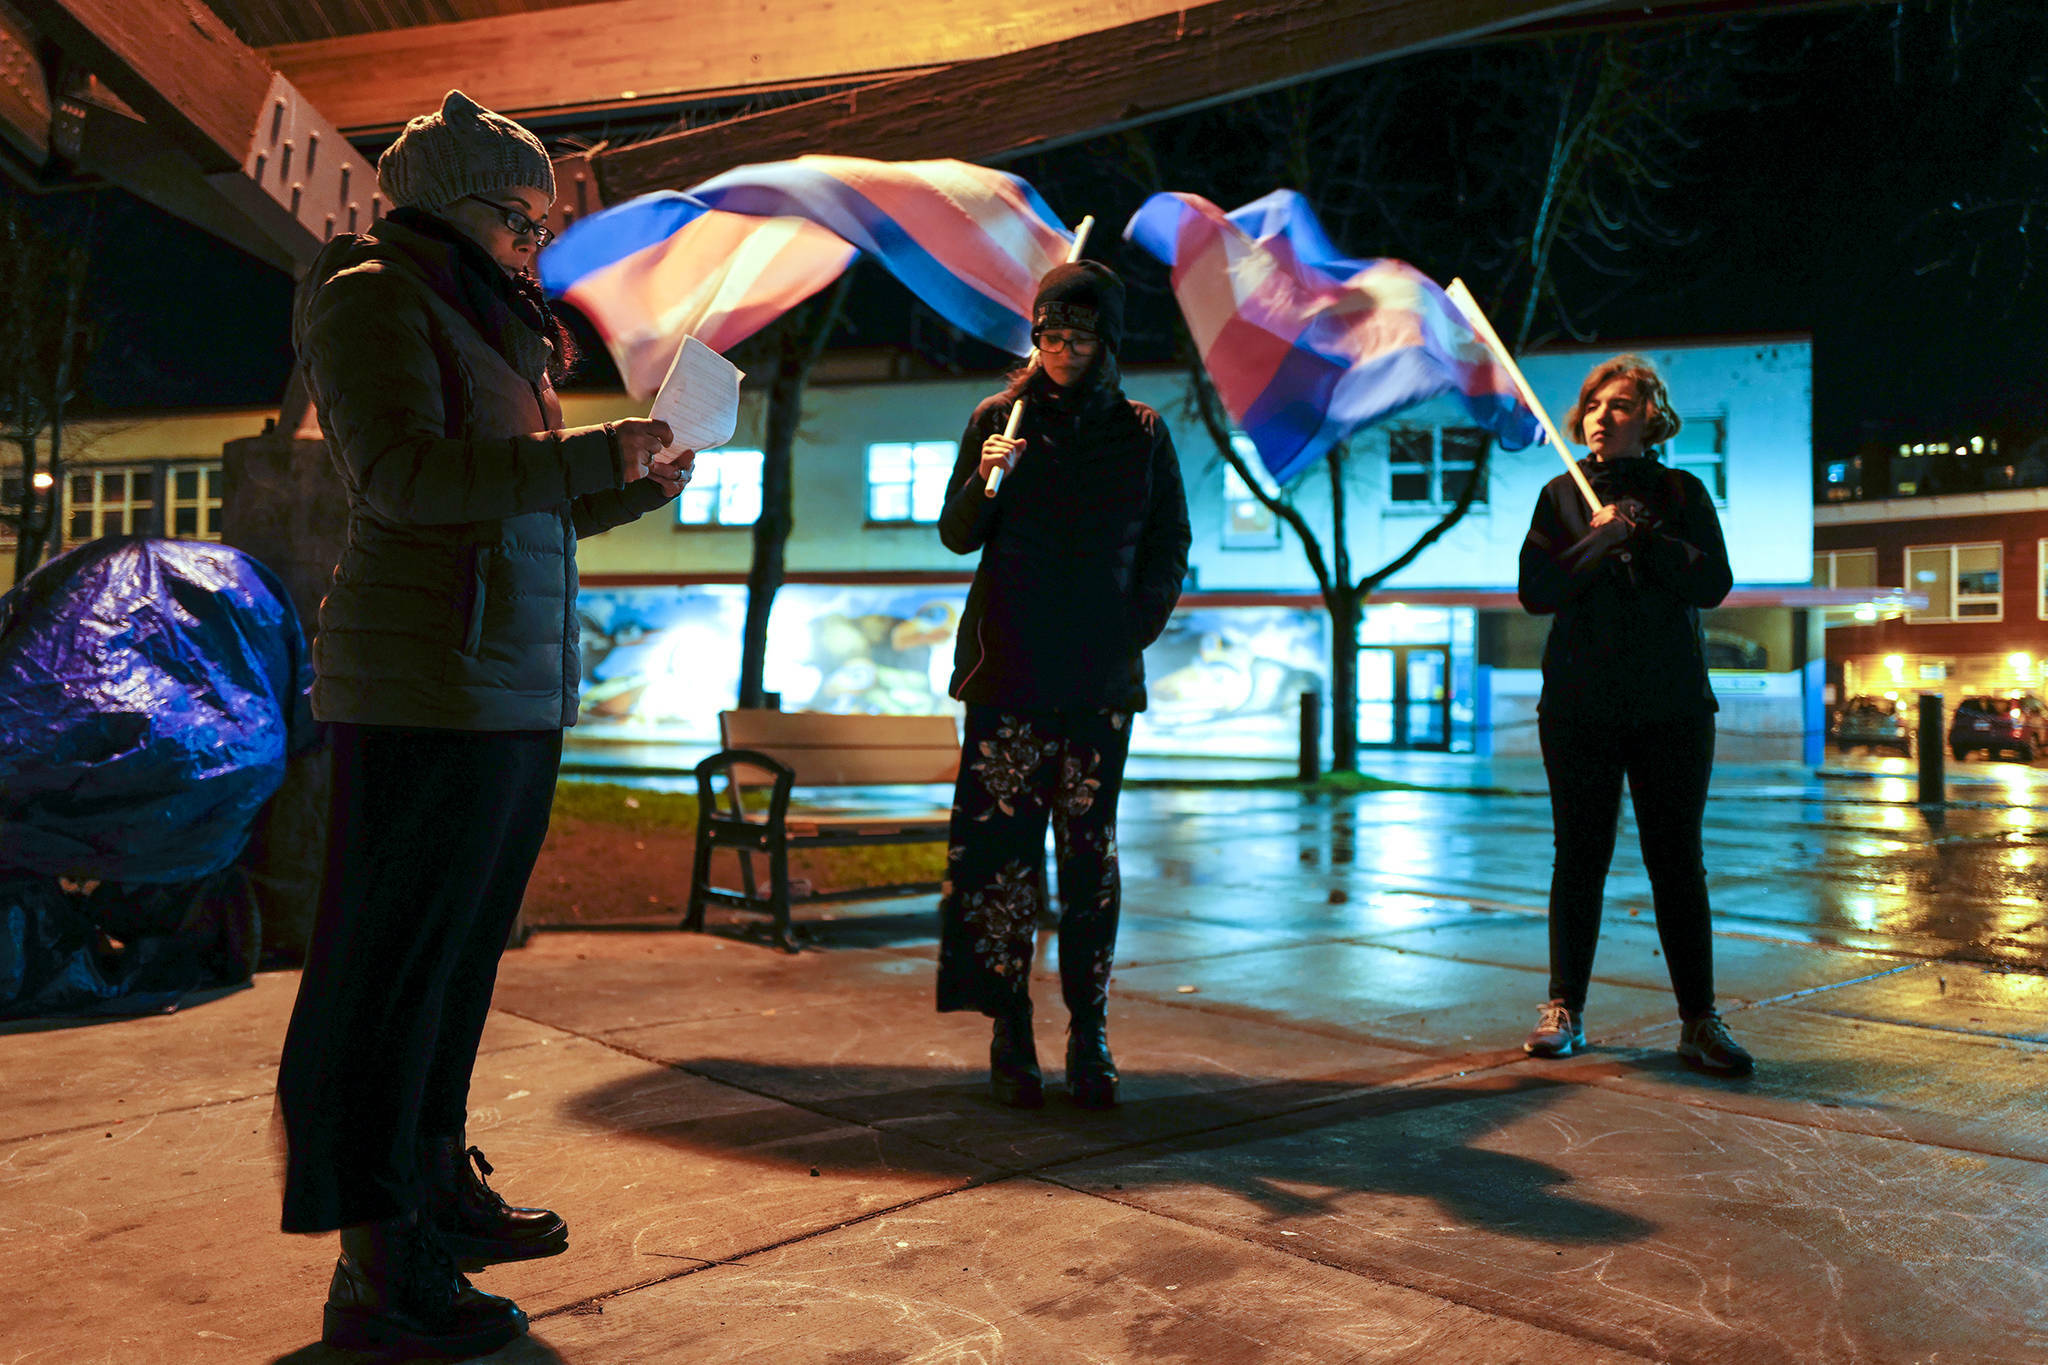 Southeast Alaska LGBTQ+ Alliance Board Chair JoLynn Shriber reads a list the names of killed transgender people as Thunder Mountain High School students Kyla Stevens, center, and Laila Williams hold flags in the wind during a transgender remembrance at Marine Park on Wednesday, Nov. 20, 2019. (Michael Penn / Juneau Empire file photo)